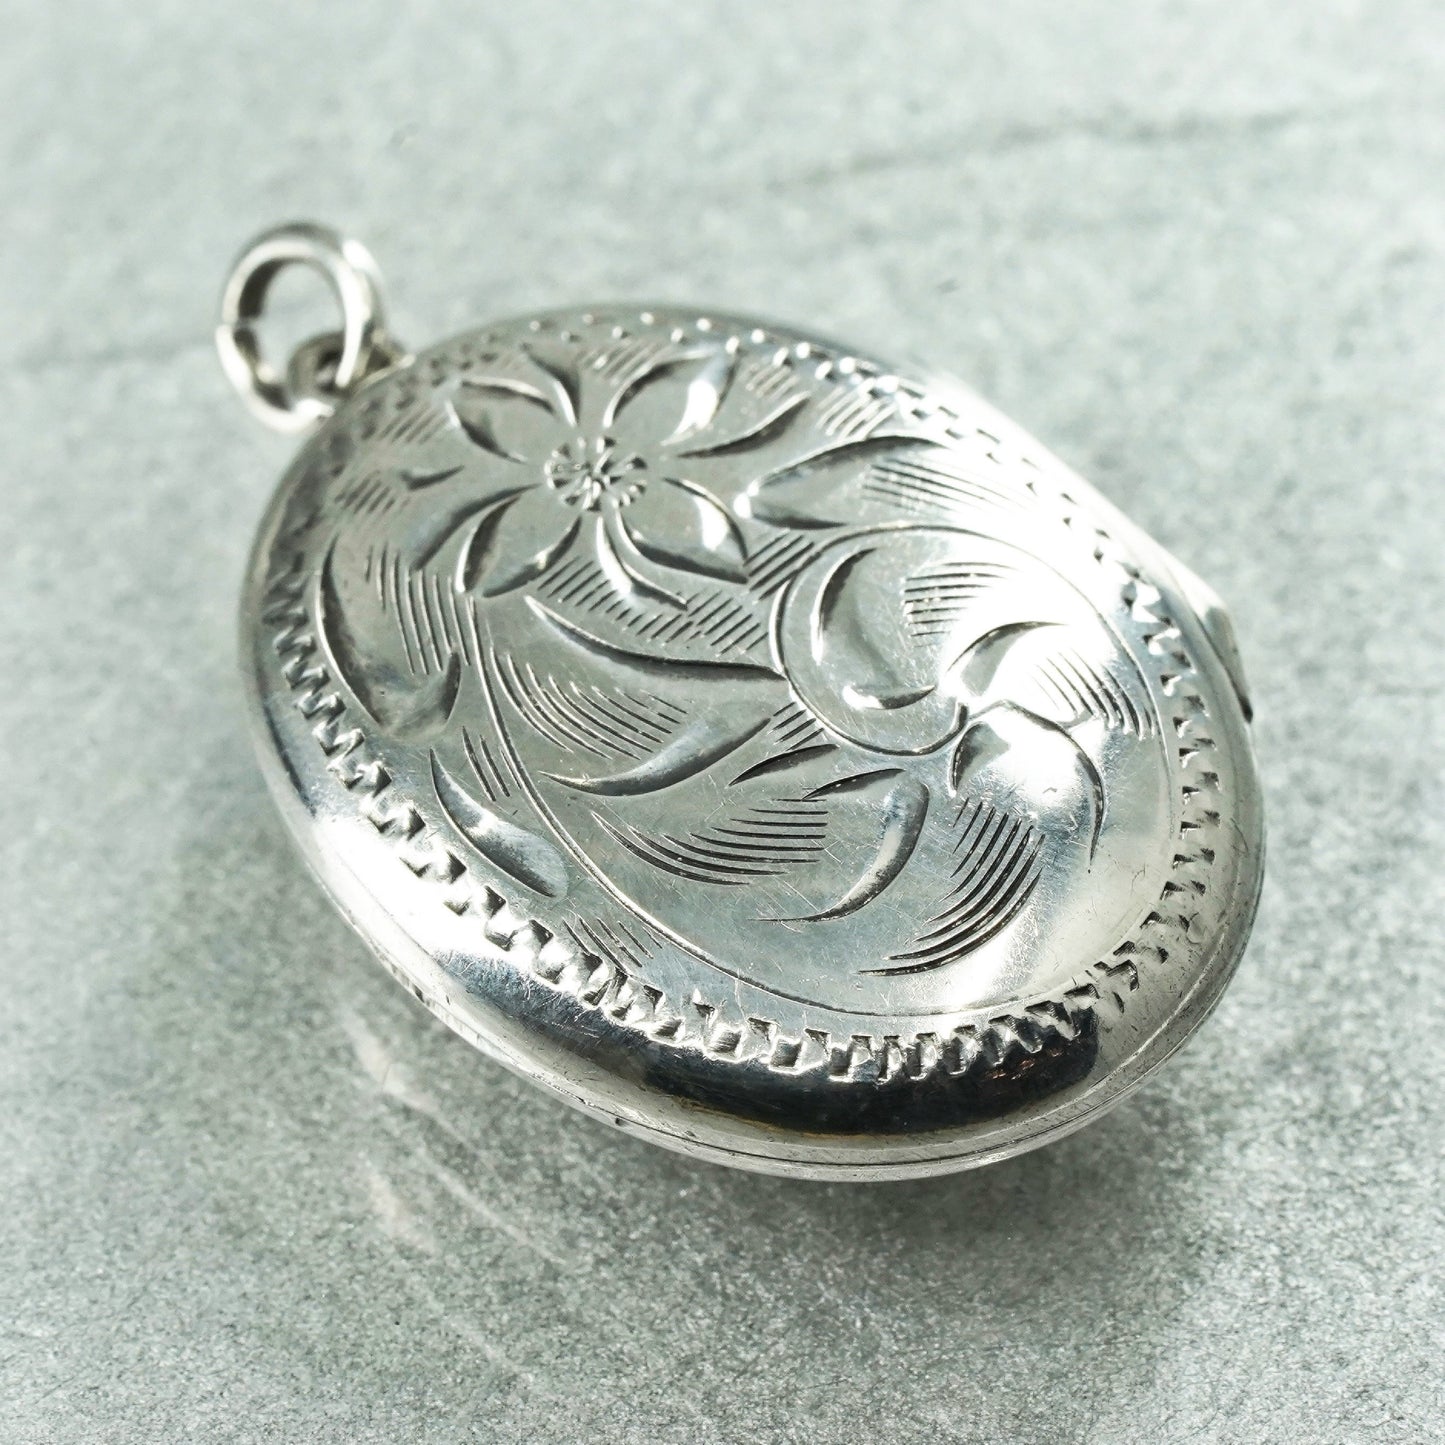 Sterling silver pendant charm, textured 925 oval floral textured photos locket